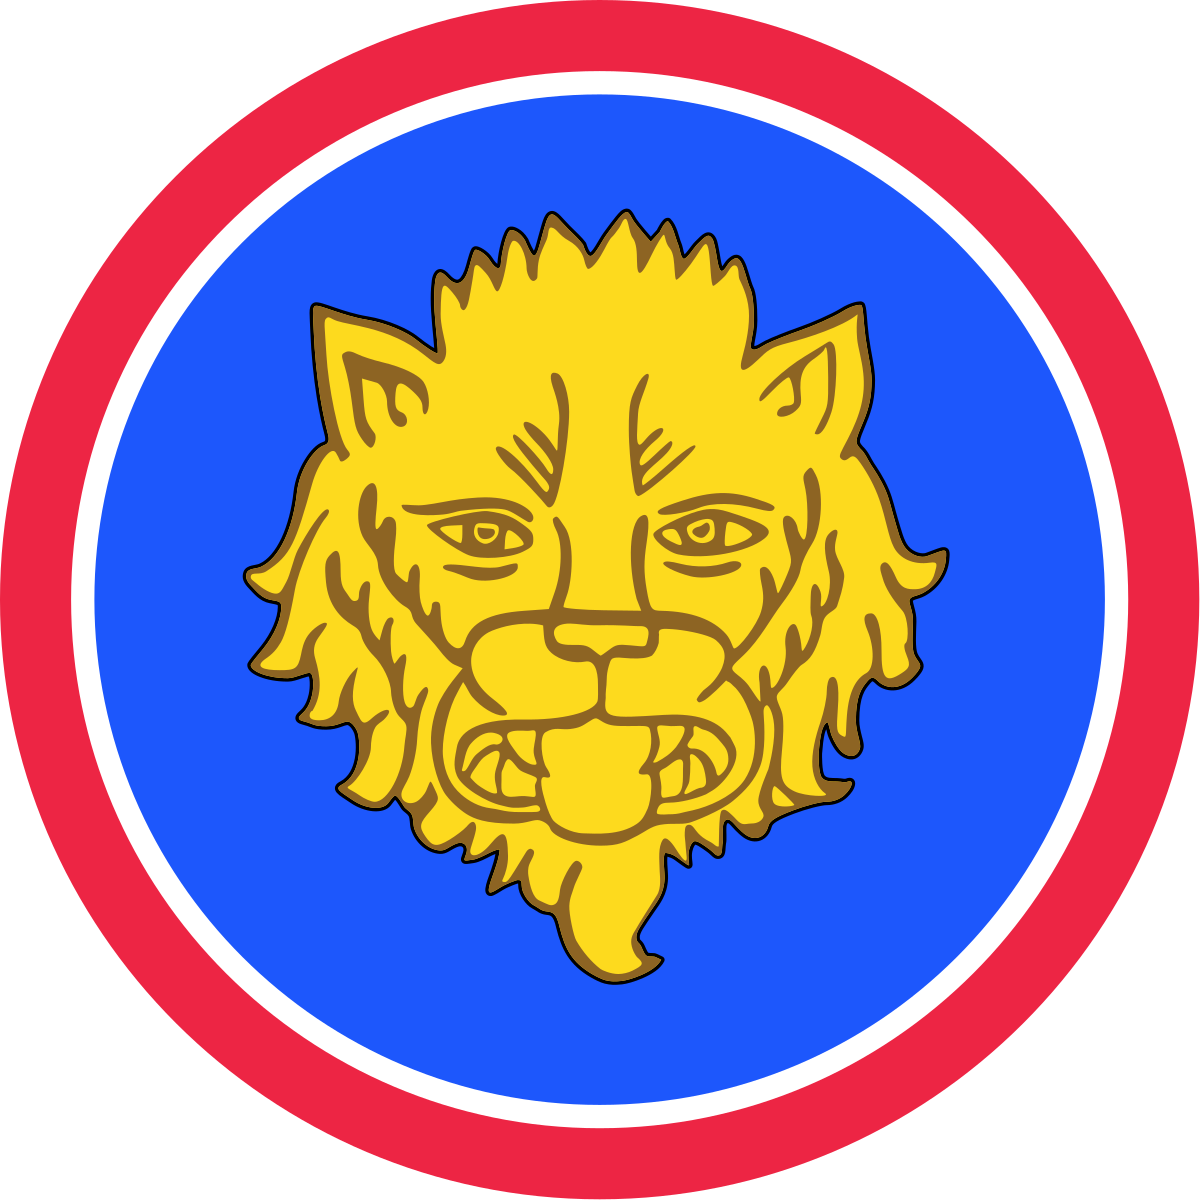 "golden Lion" Patch Of The 106th Infantry Division - 106th Infantry Division (1200x1200)